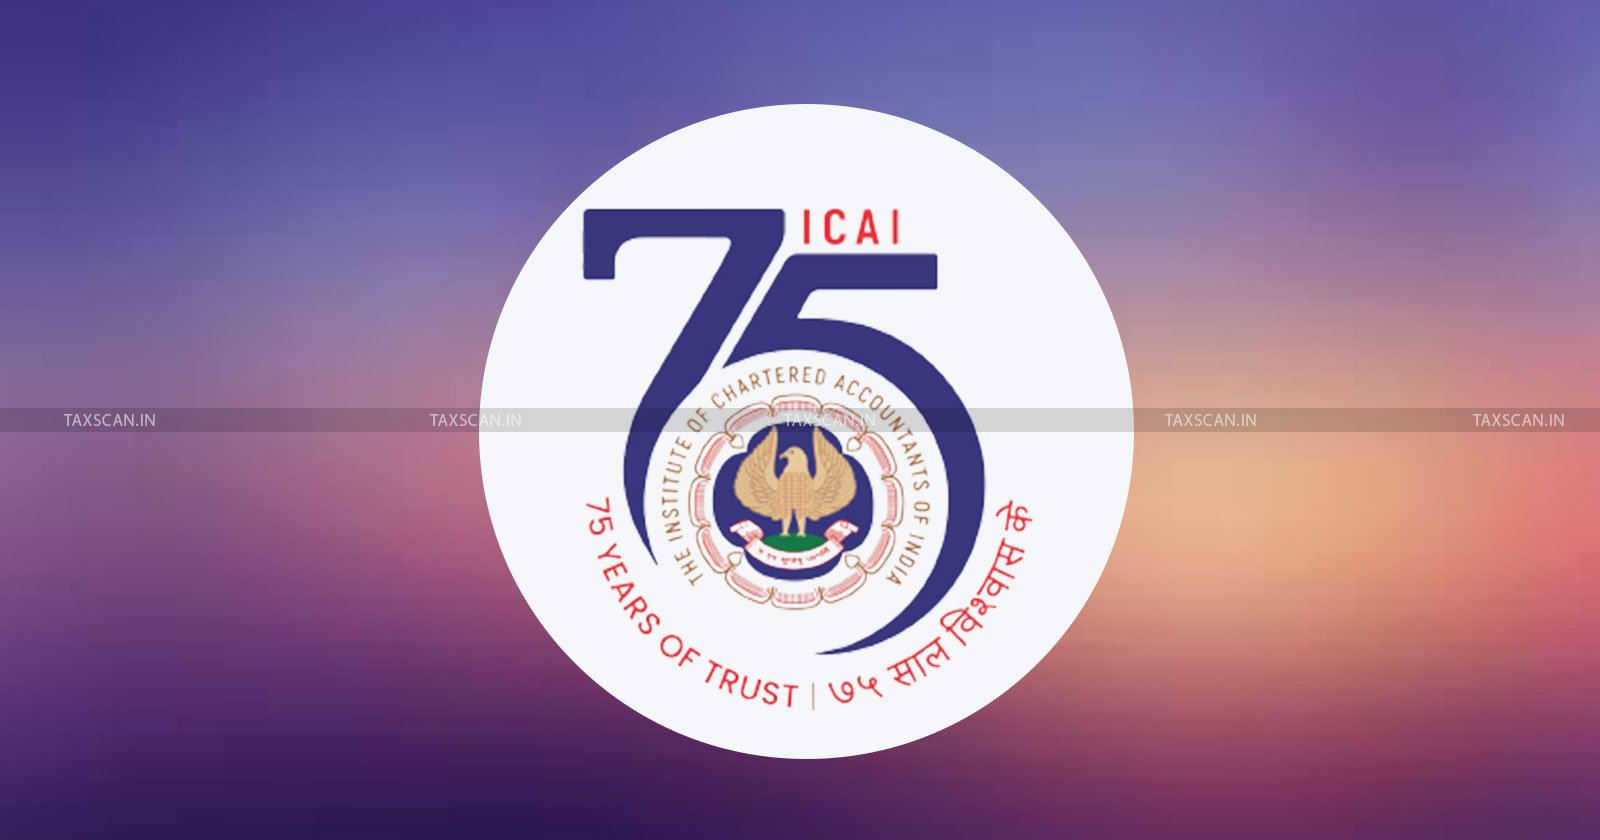 Chartered Accountants Bill: Is Govt interfering with ICAI autonomy or  aligning CA profession with the global world?, ETCFO